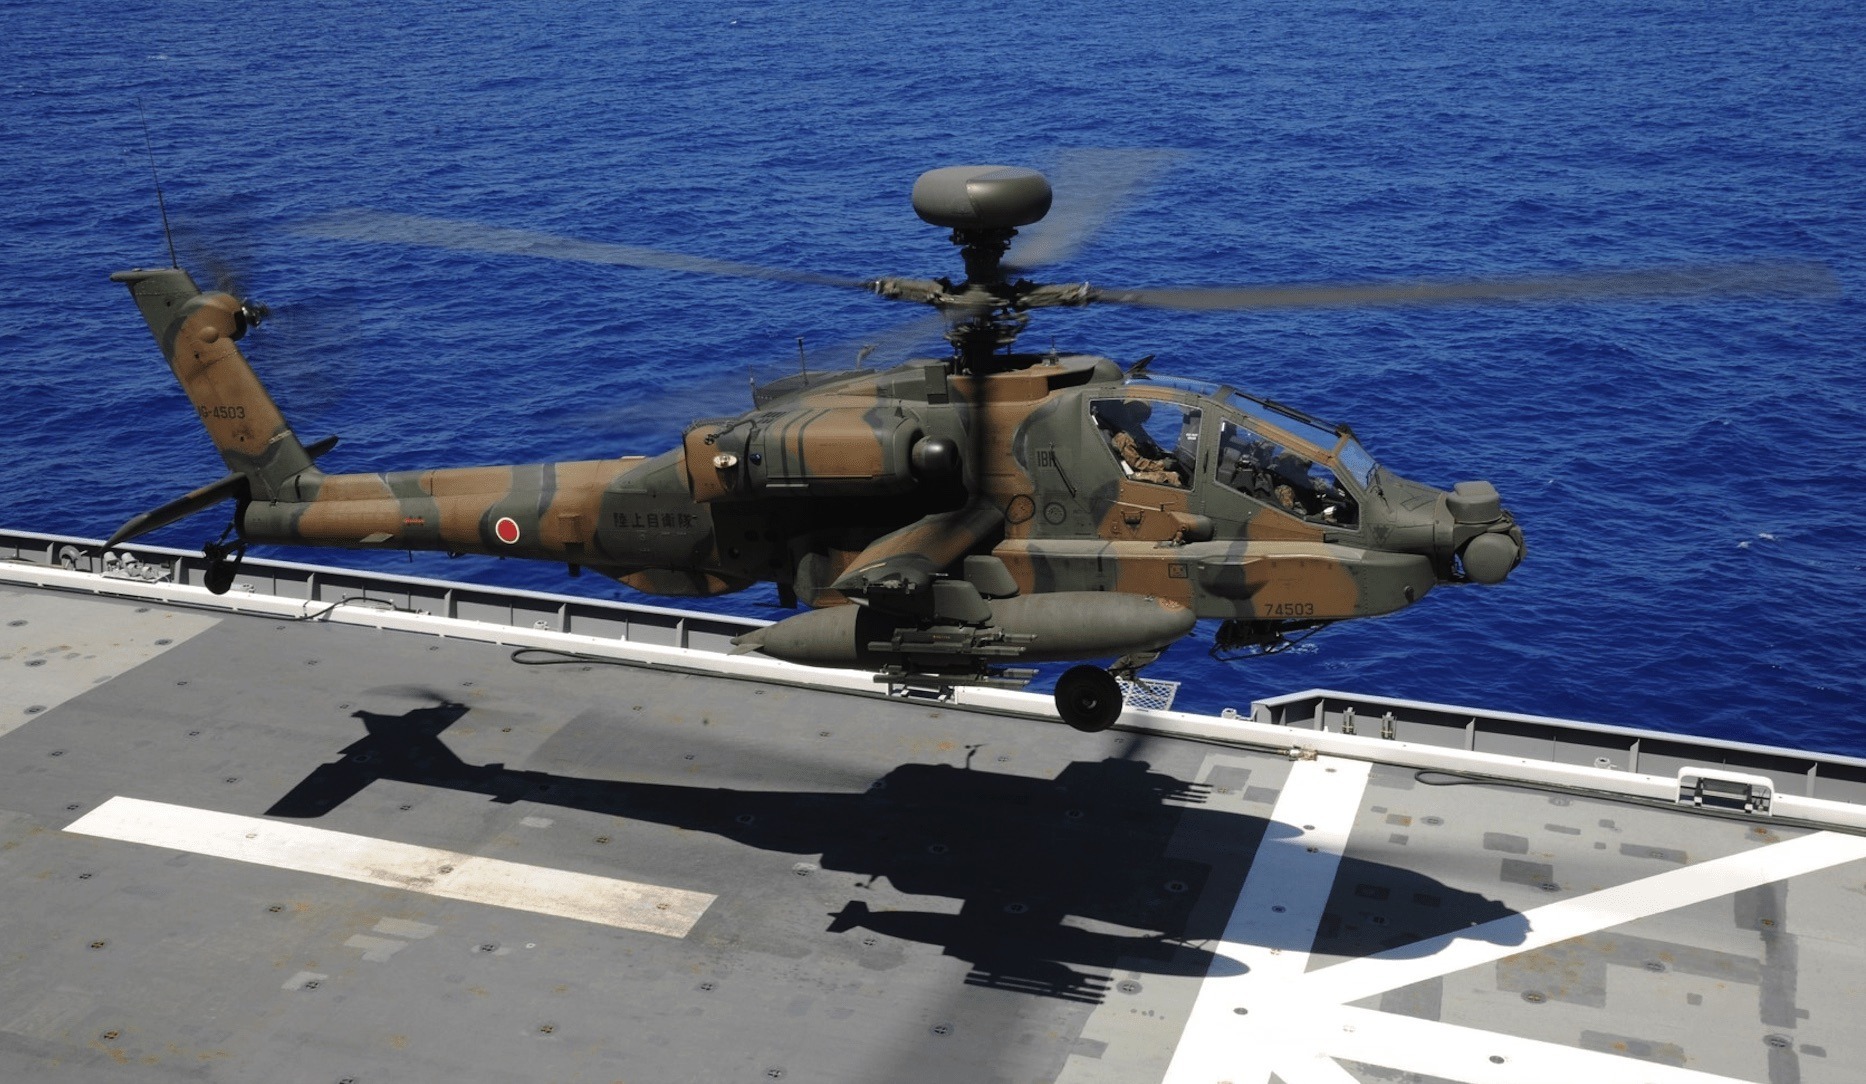 Japanese Apache helicopter landing on a carrier